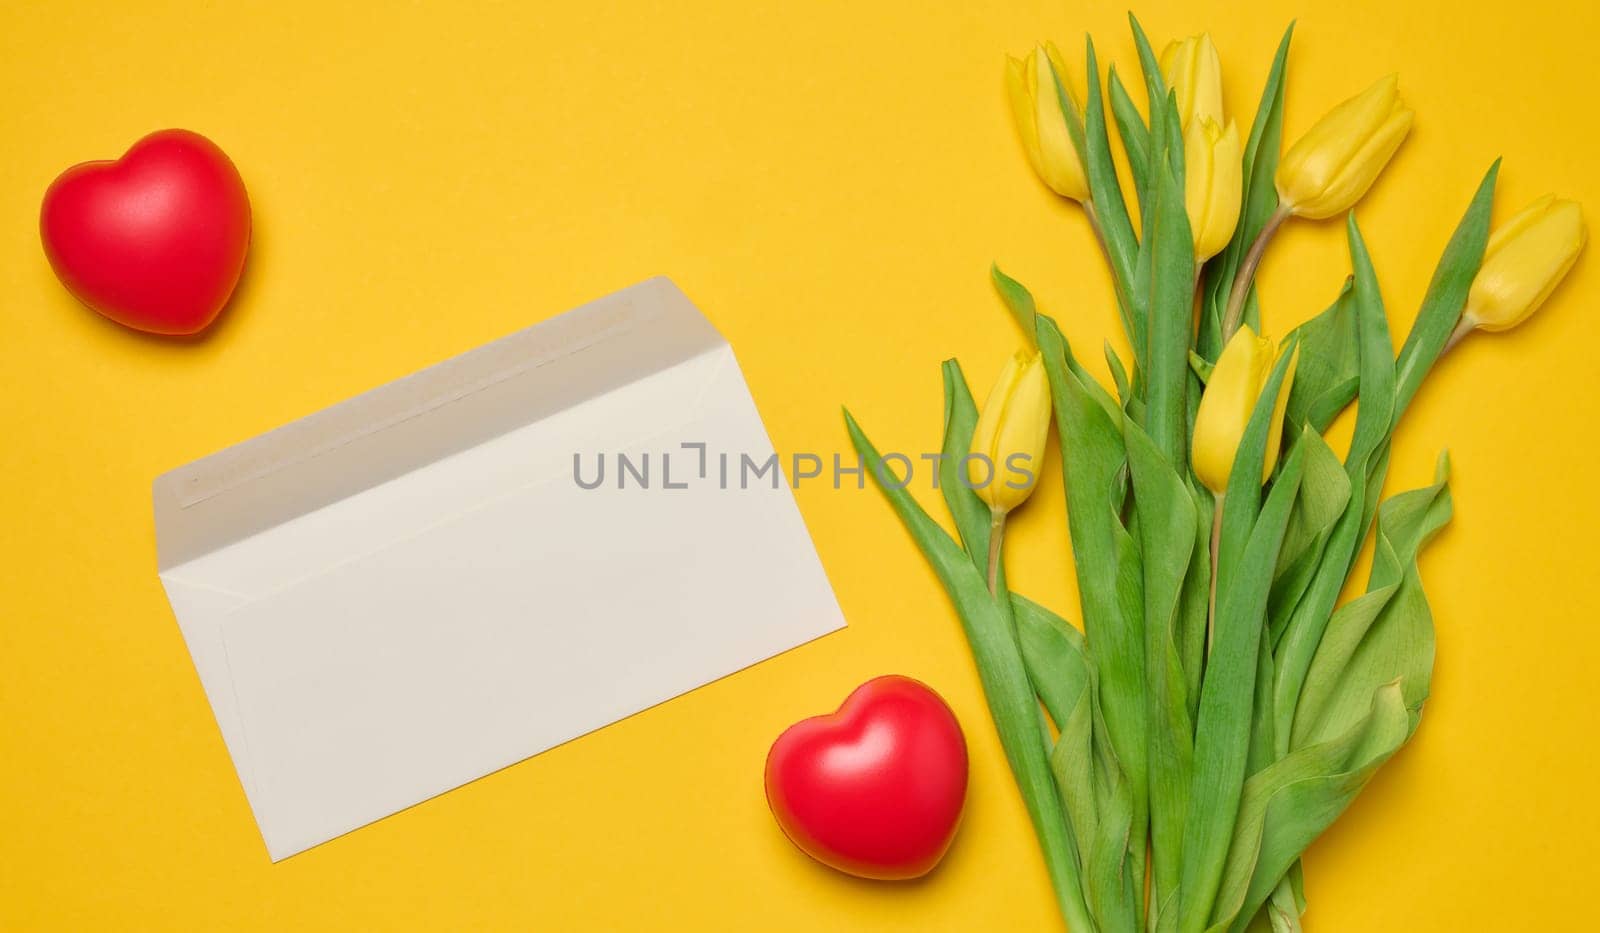 Envelope and red heart and bouquet of blooming tulips with green leaves on a yellow background by ndanko